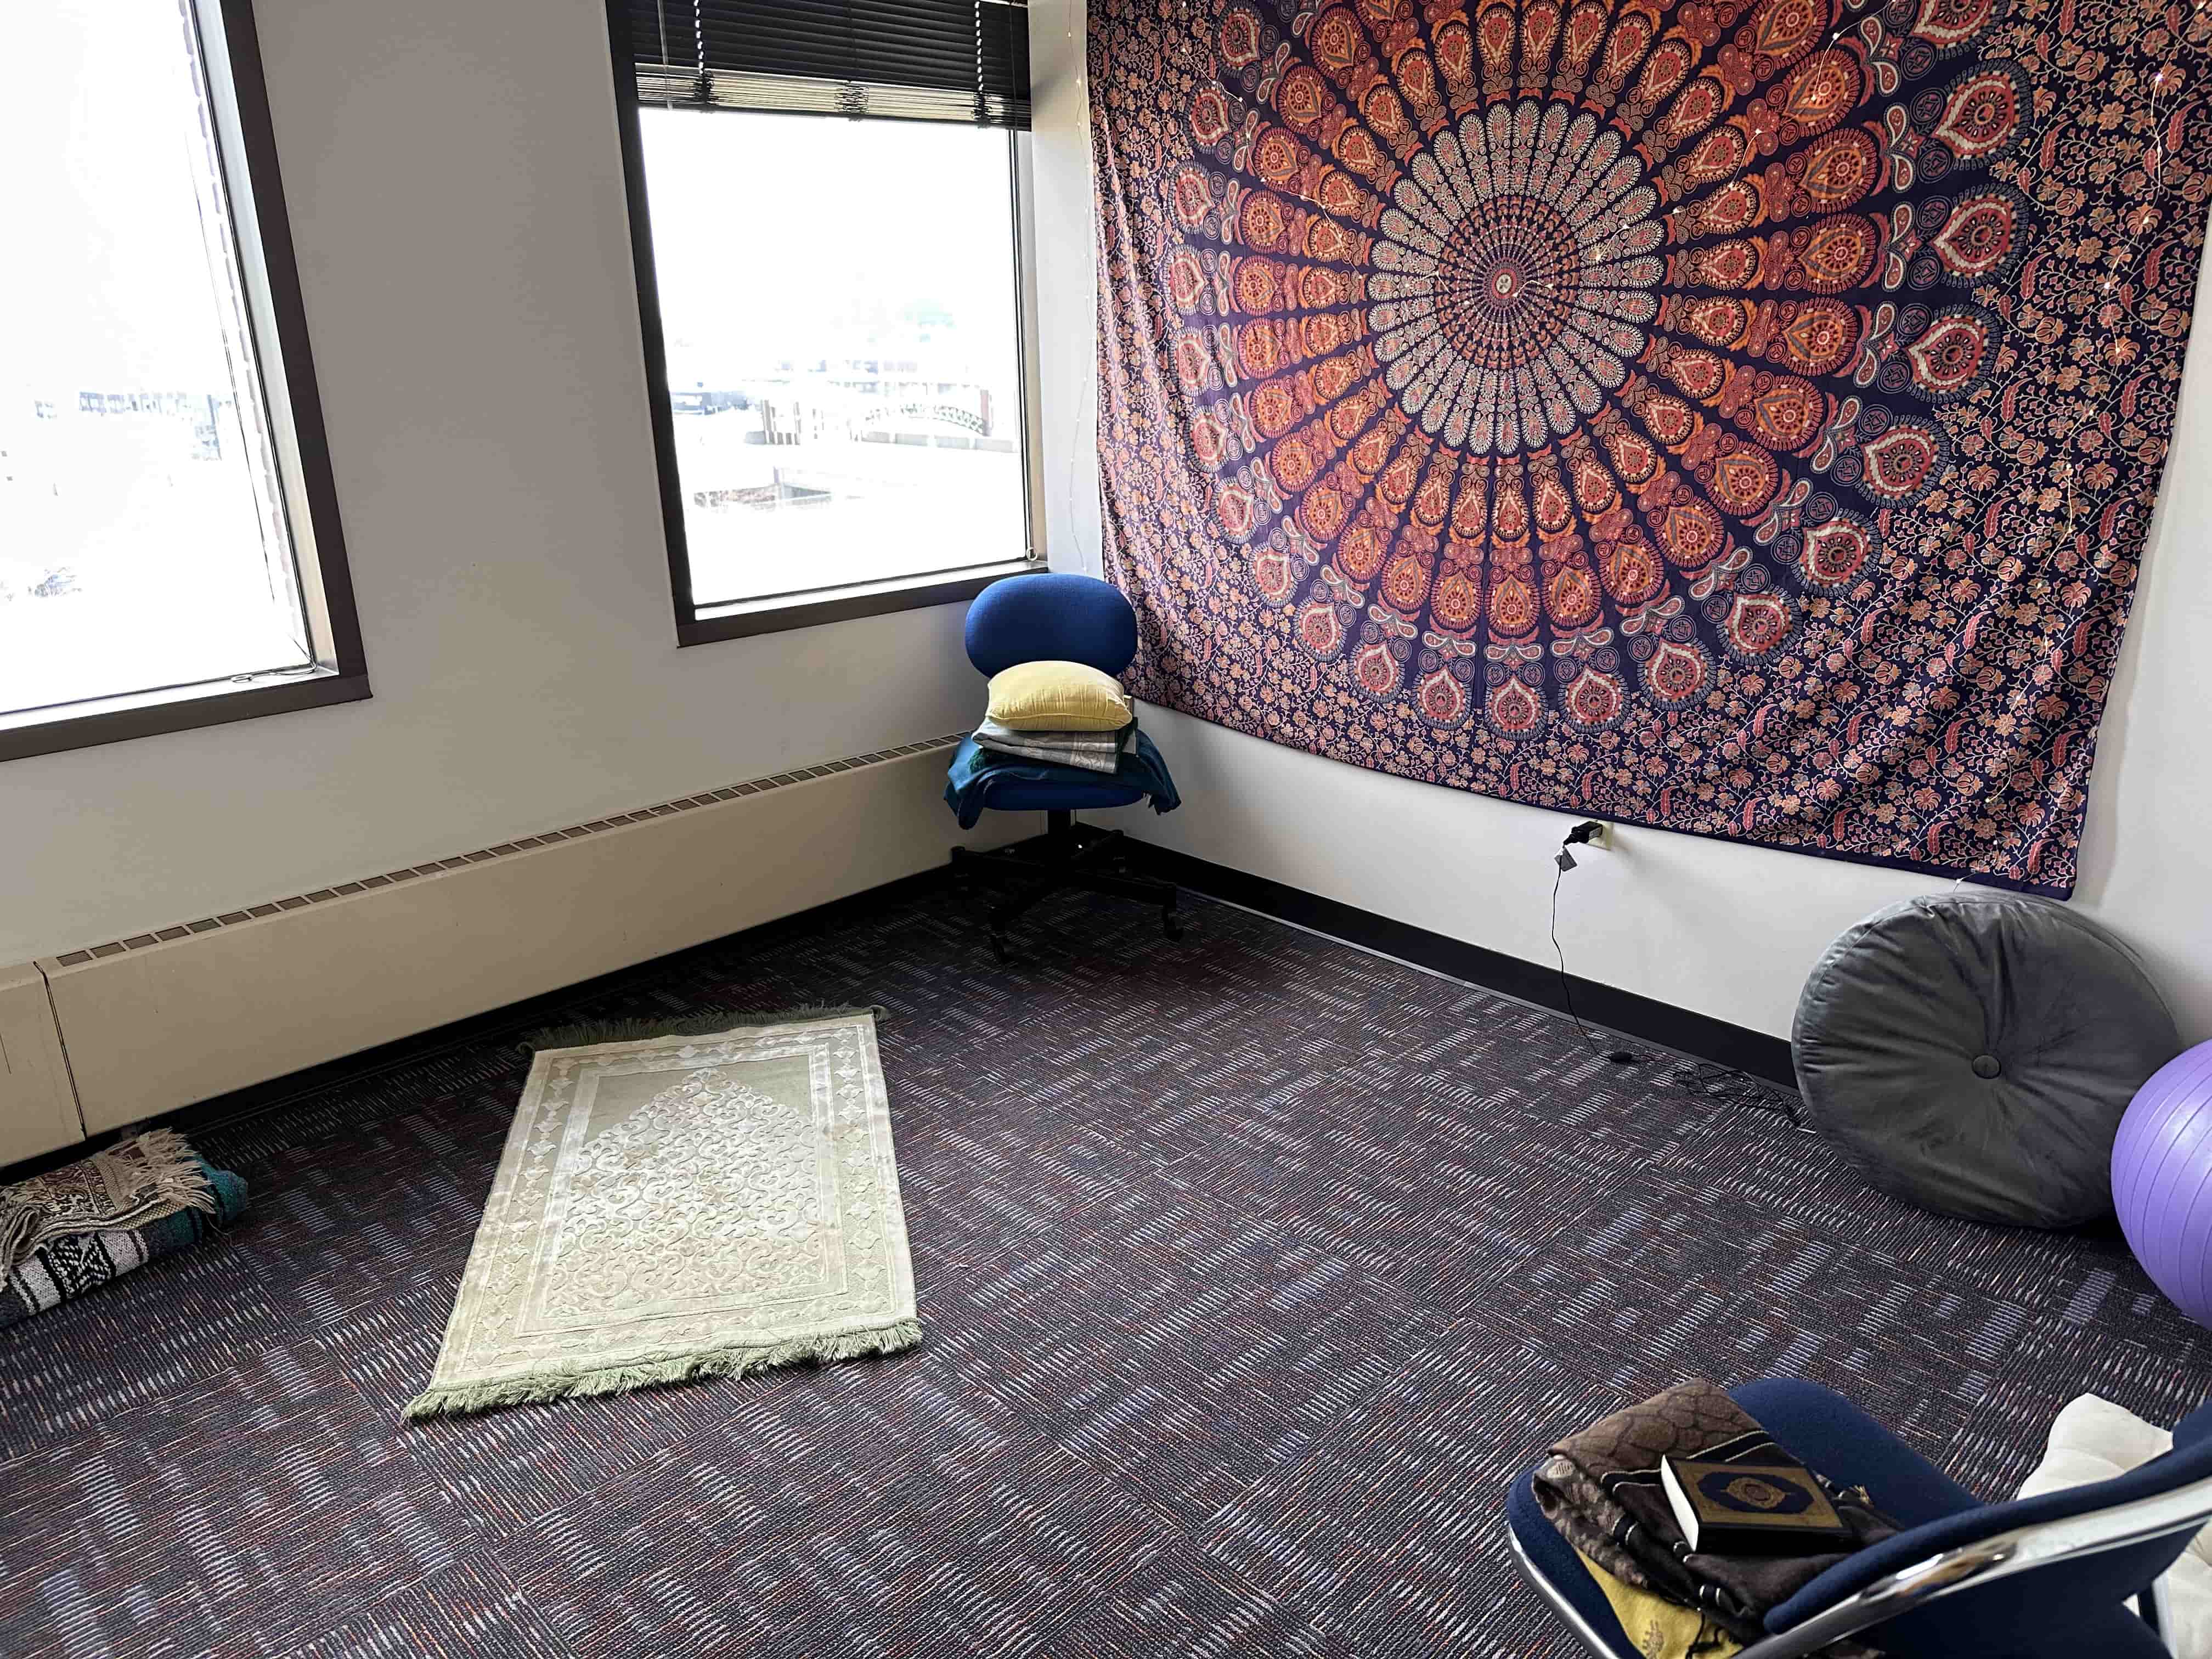 A room has a prayer rug on the floor as well as a mandala tapestry on one wall. Chairs and cushions are also visible.